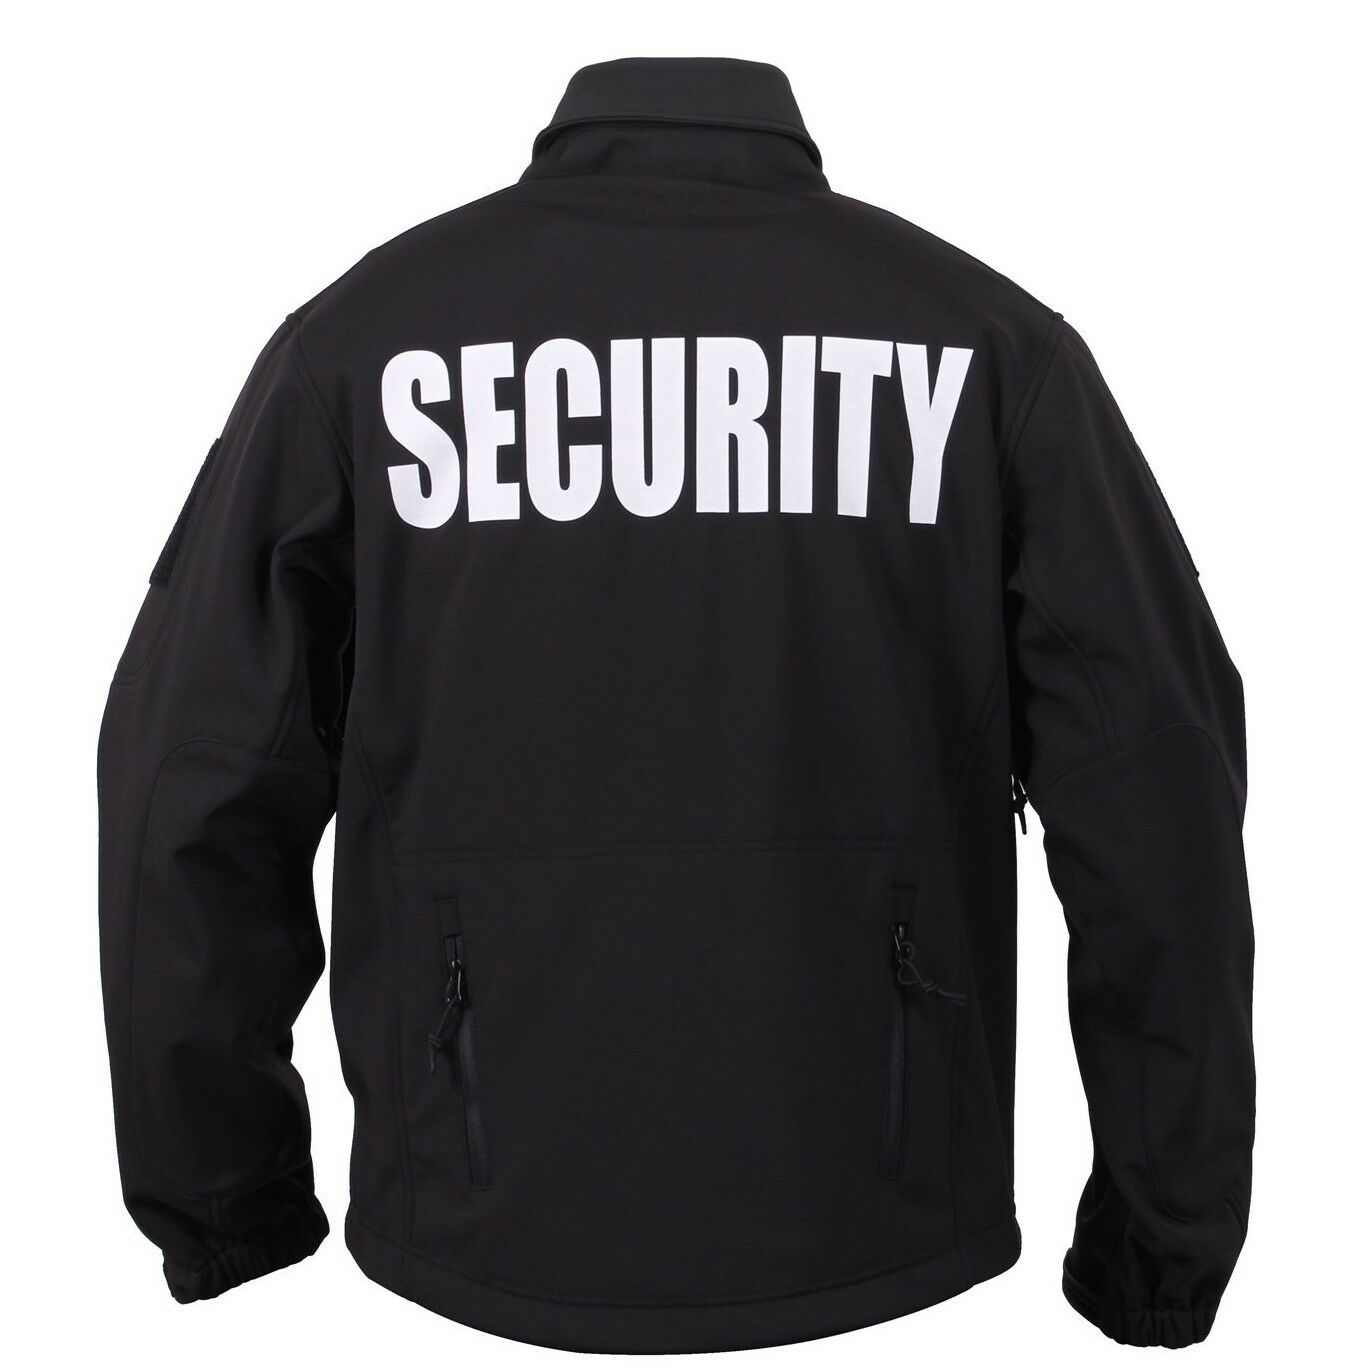 Rothco Spec Ops Soft Shell Security Jacket - Black